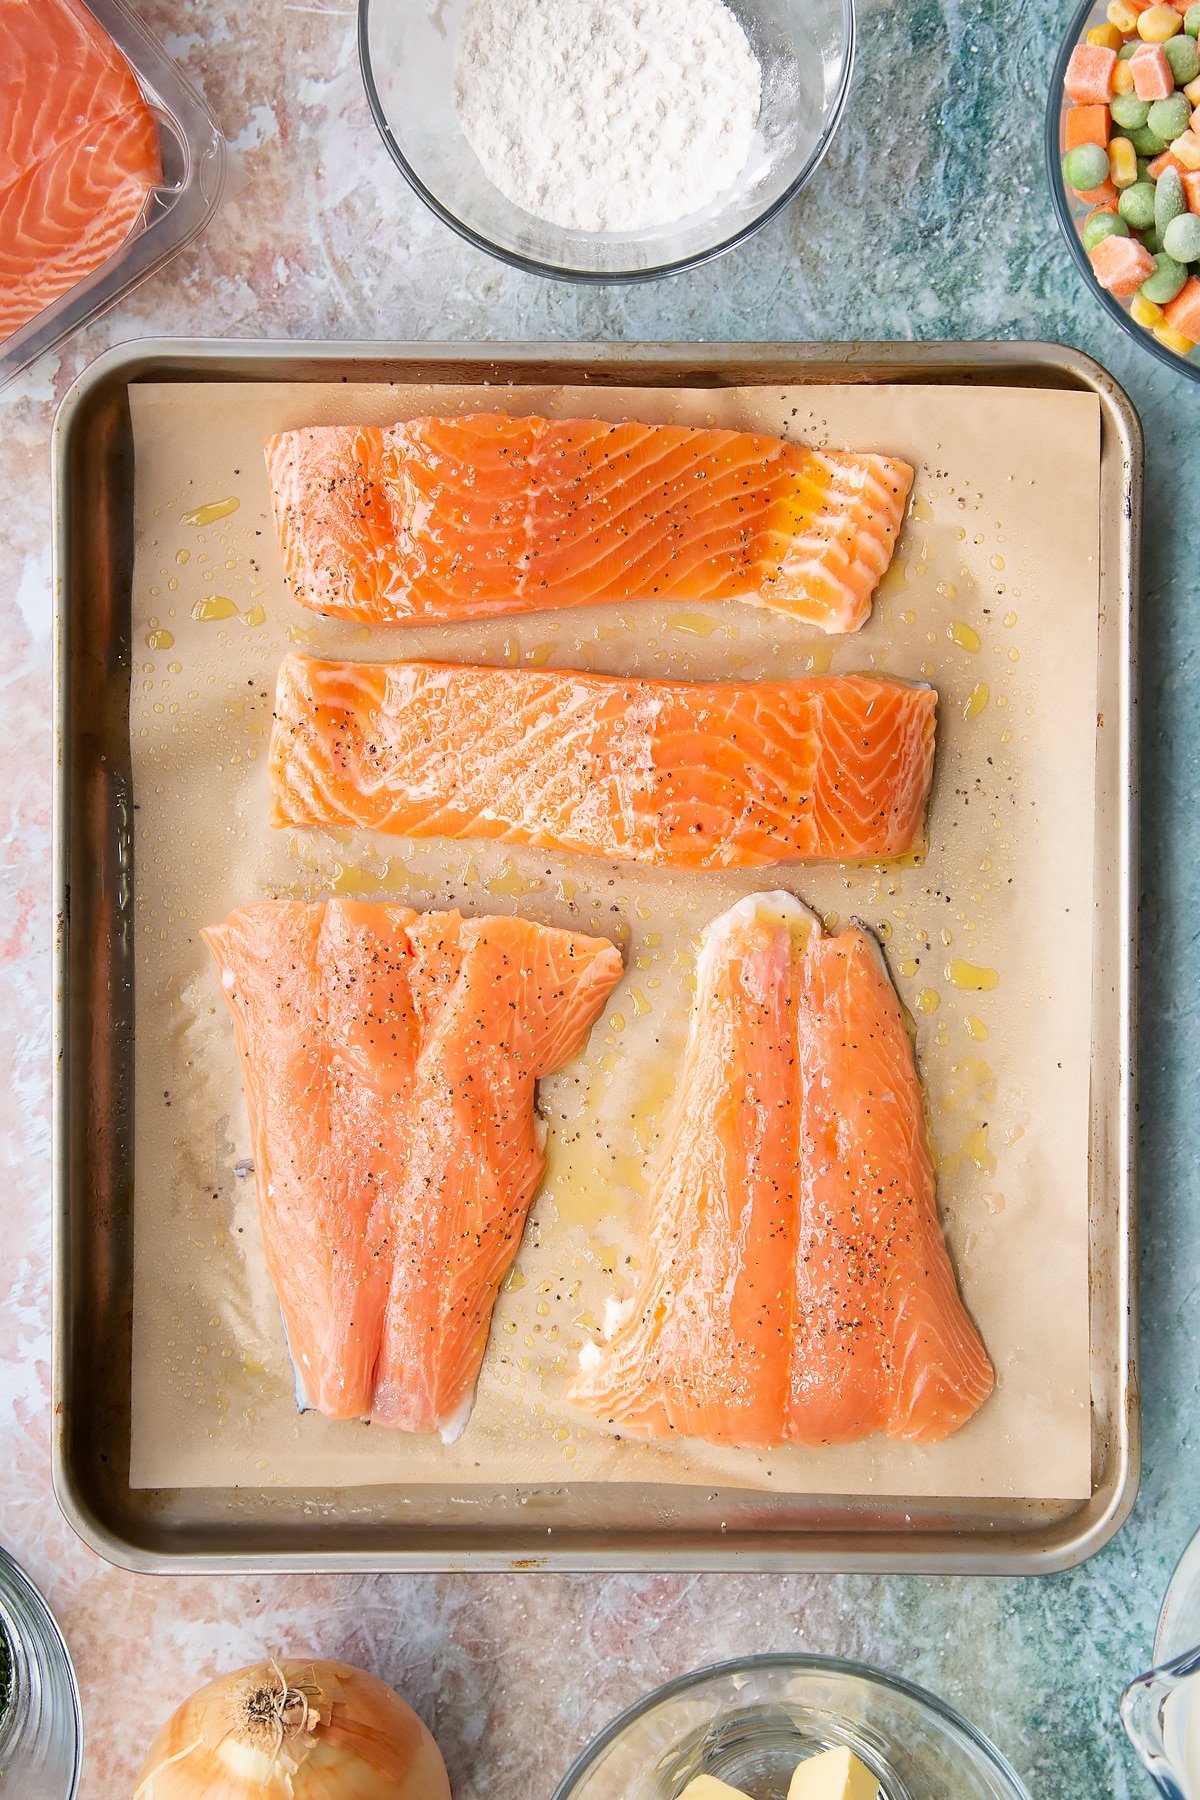 Overhead shot of the large salmon pieces on a baking tray before being moved to the oven.